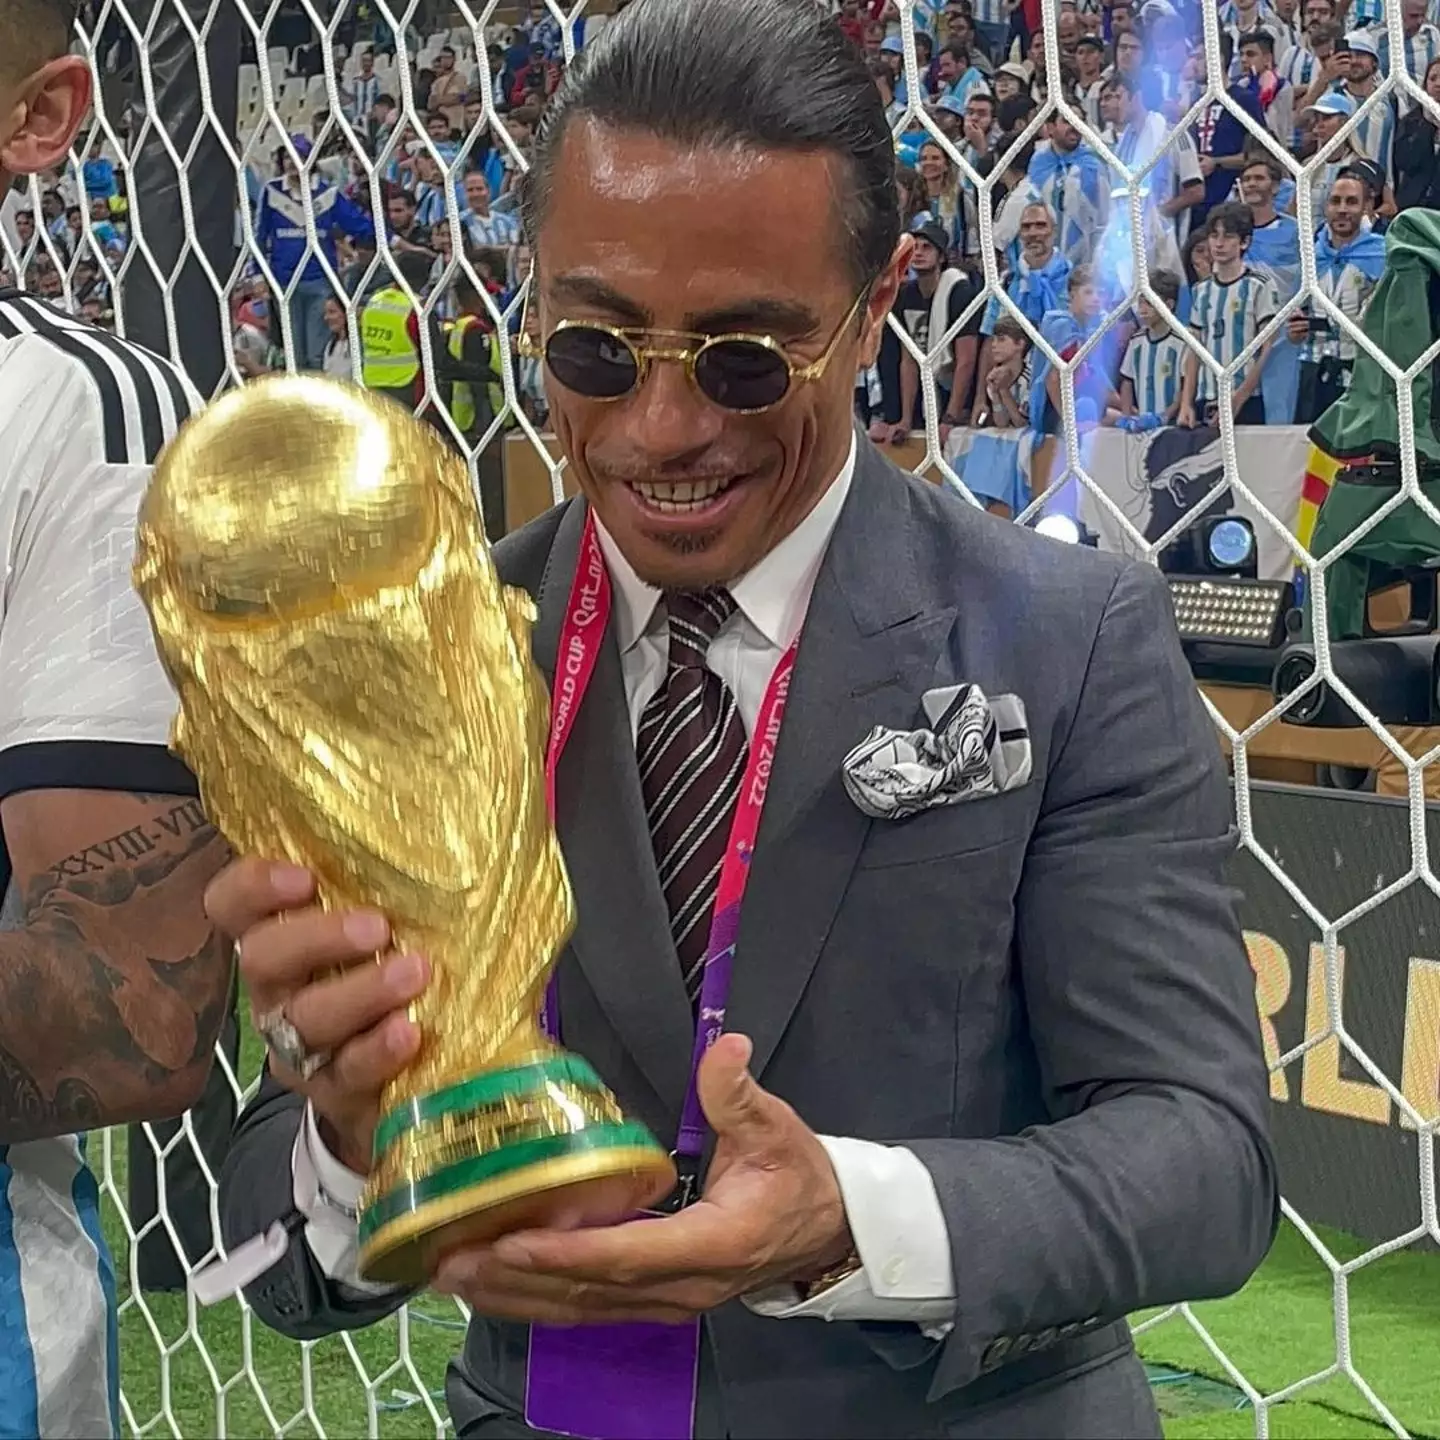 Salt Bae was slammed for holding the World Cup trophy.